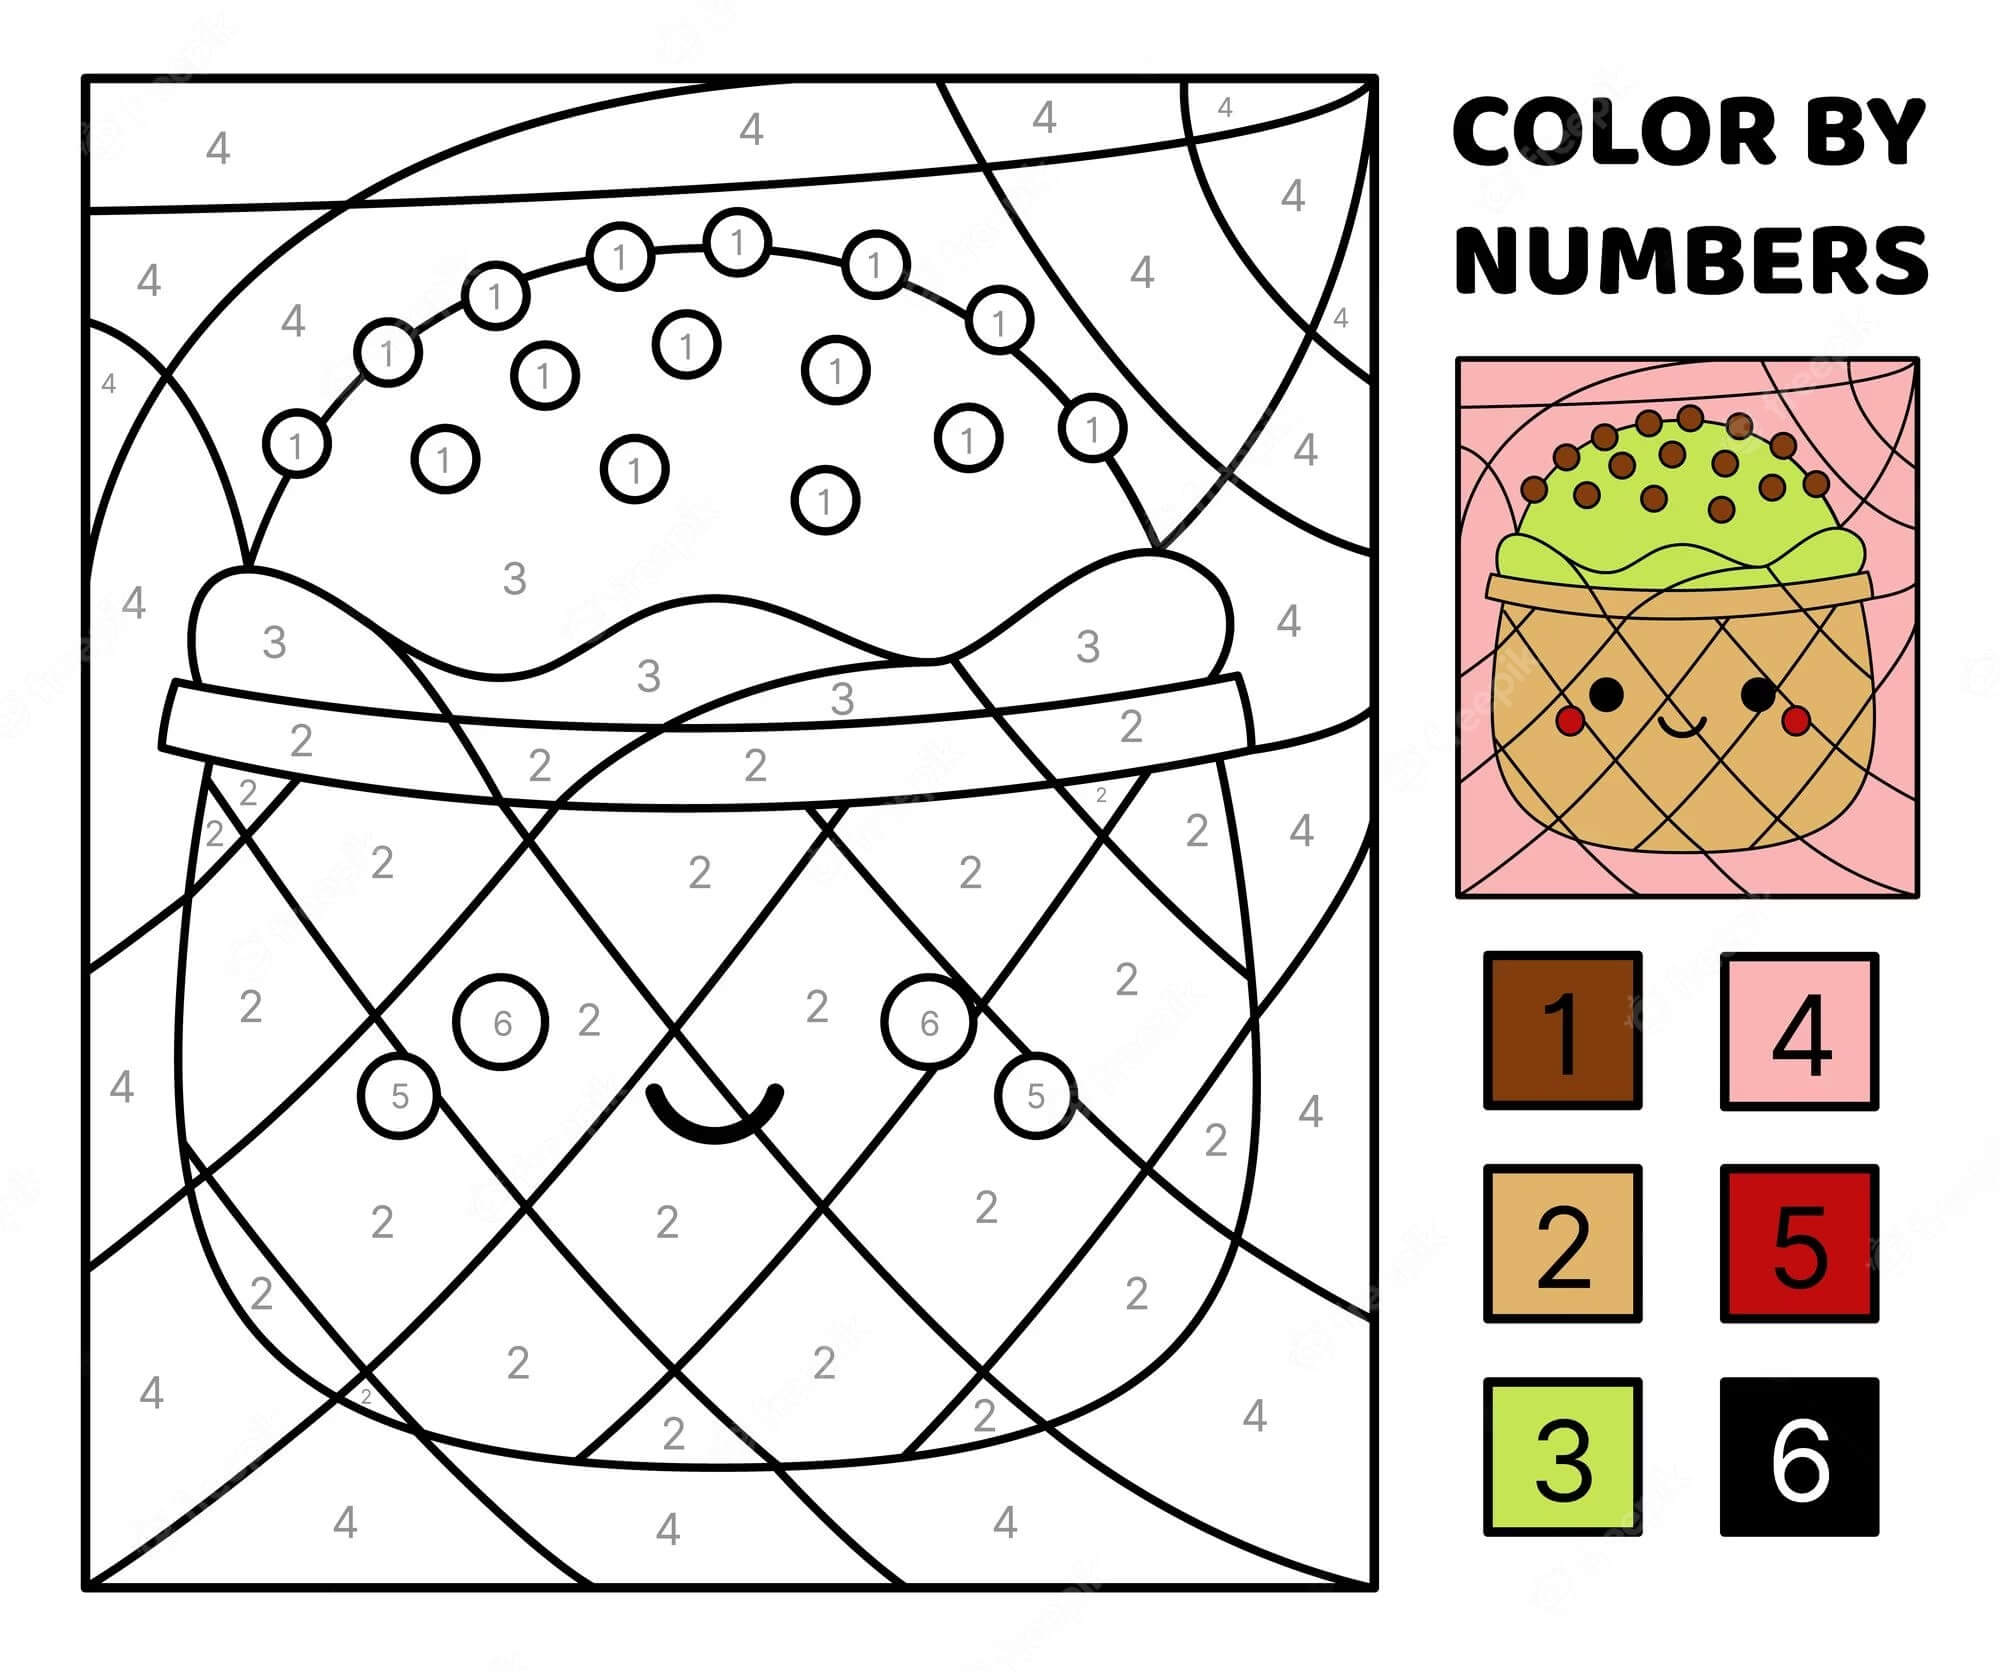 Sweet Ice Cream Color By Number - Download, Print Now!